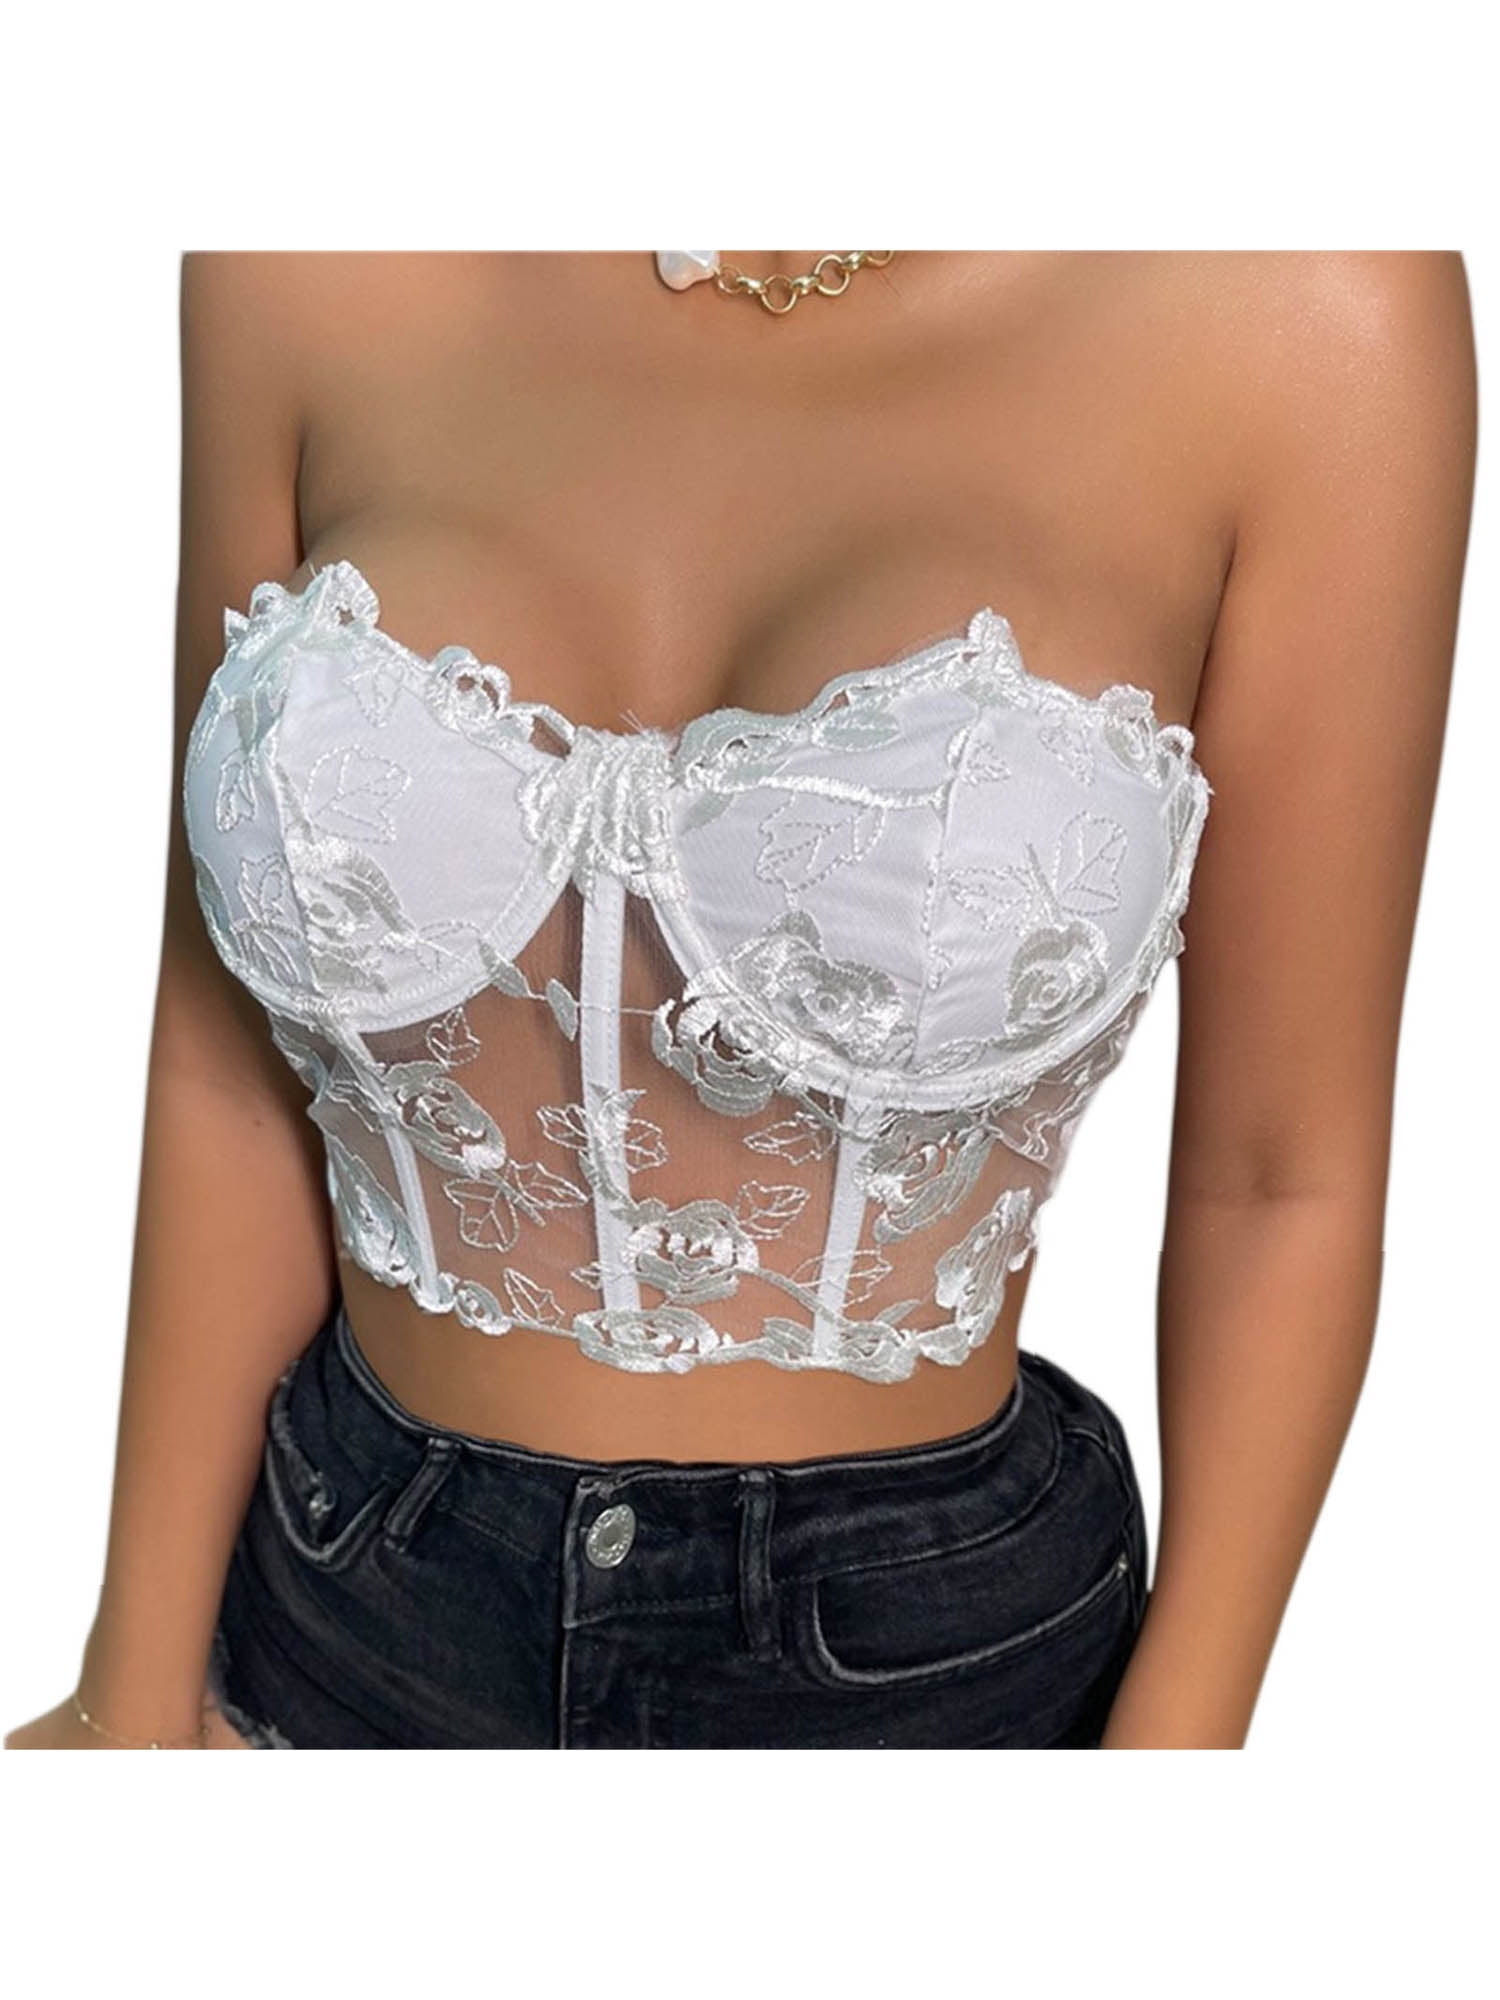 TheFound Women Lace Corset Crop Top Push Up Bustier Floral Top Cami Top  Aesthetic Spaghetti Strap Top Camisole Bralette Clubwear